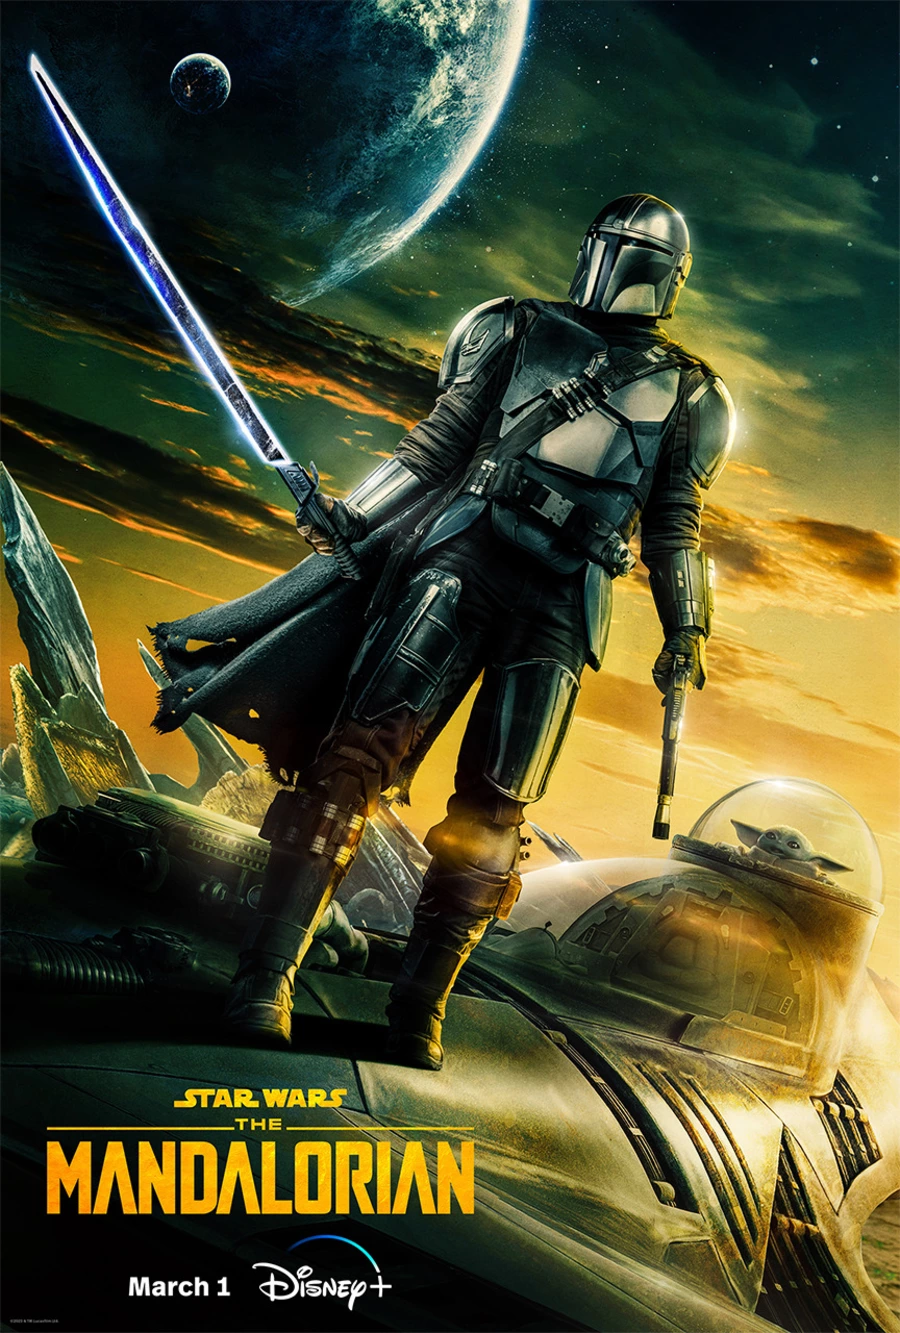 5878 a new poster for the third season of the mandalorian which will premiere on march 1